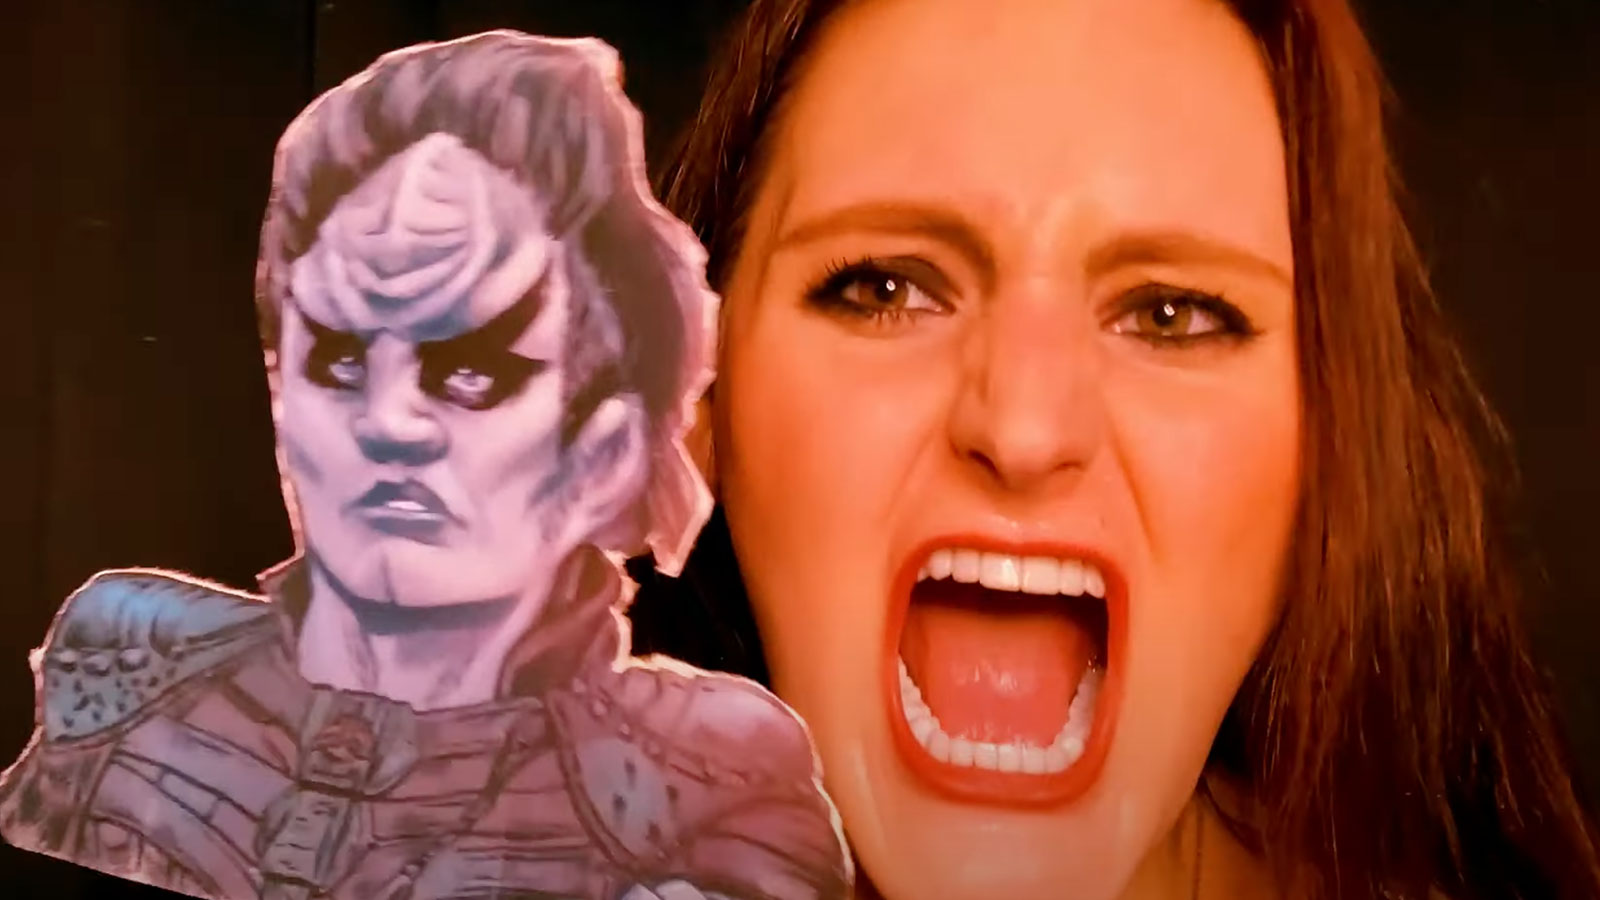 STAR TREK ONLINE releases "House United" for Playstation And Xbox + Mary Chieffo's music video for her new Klingon song "Steel & Flame"